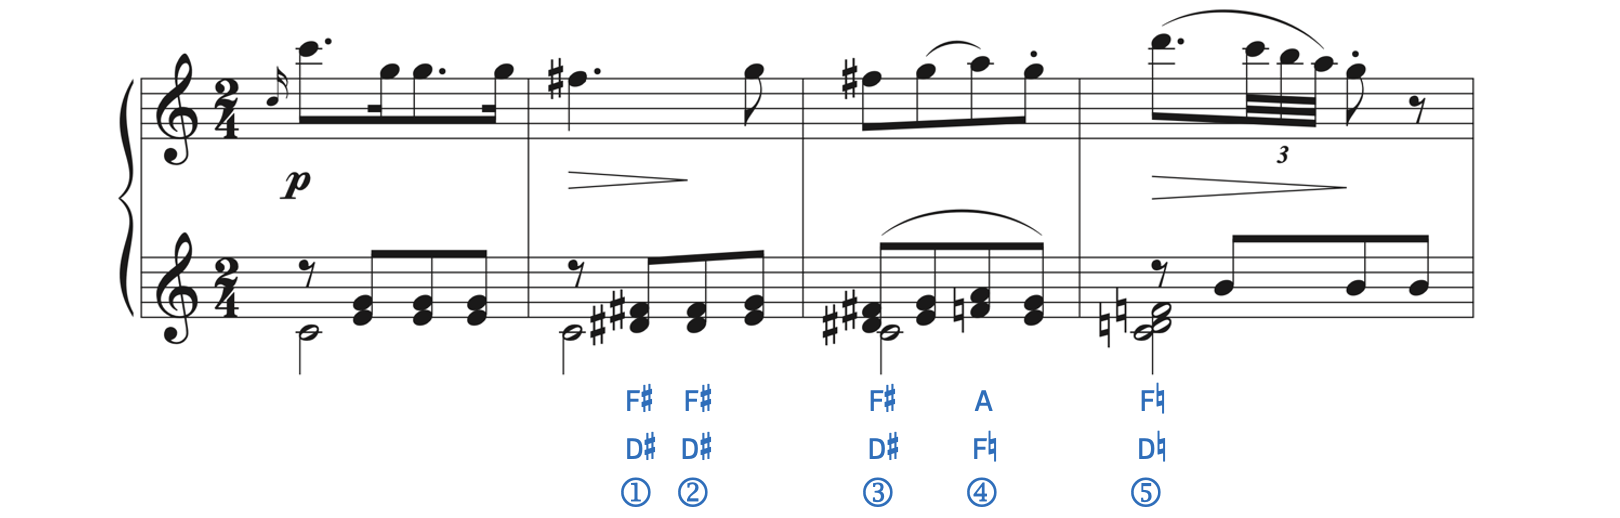 The music to Candeille's “Romance de L’Orpheline de Berlin.” In the bottom staff, labeled as number 1, there is D-sharp4 and F-sharp4, both with sharps. Number 2 shows D-sharp4 and F-sharp4 repeated but the sharps are not rewritten. There is a bar line before number 3. Number 3 shows D-sharp4 and F-sharp4 and the sharps are added again. Number 4 shows F-natural4 and A4. There is a natural sign in front of F. There is a bar line before number 5. Number 5 shows F-natural4 and D-natural4. Natural signs are added in front of both notes. These are courtesy accidentals.